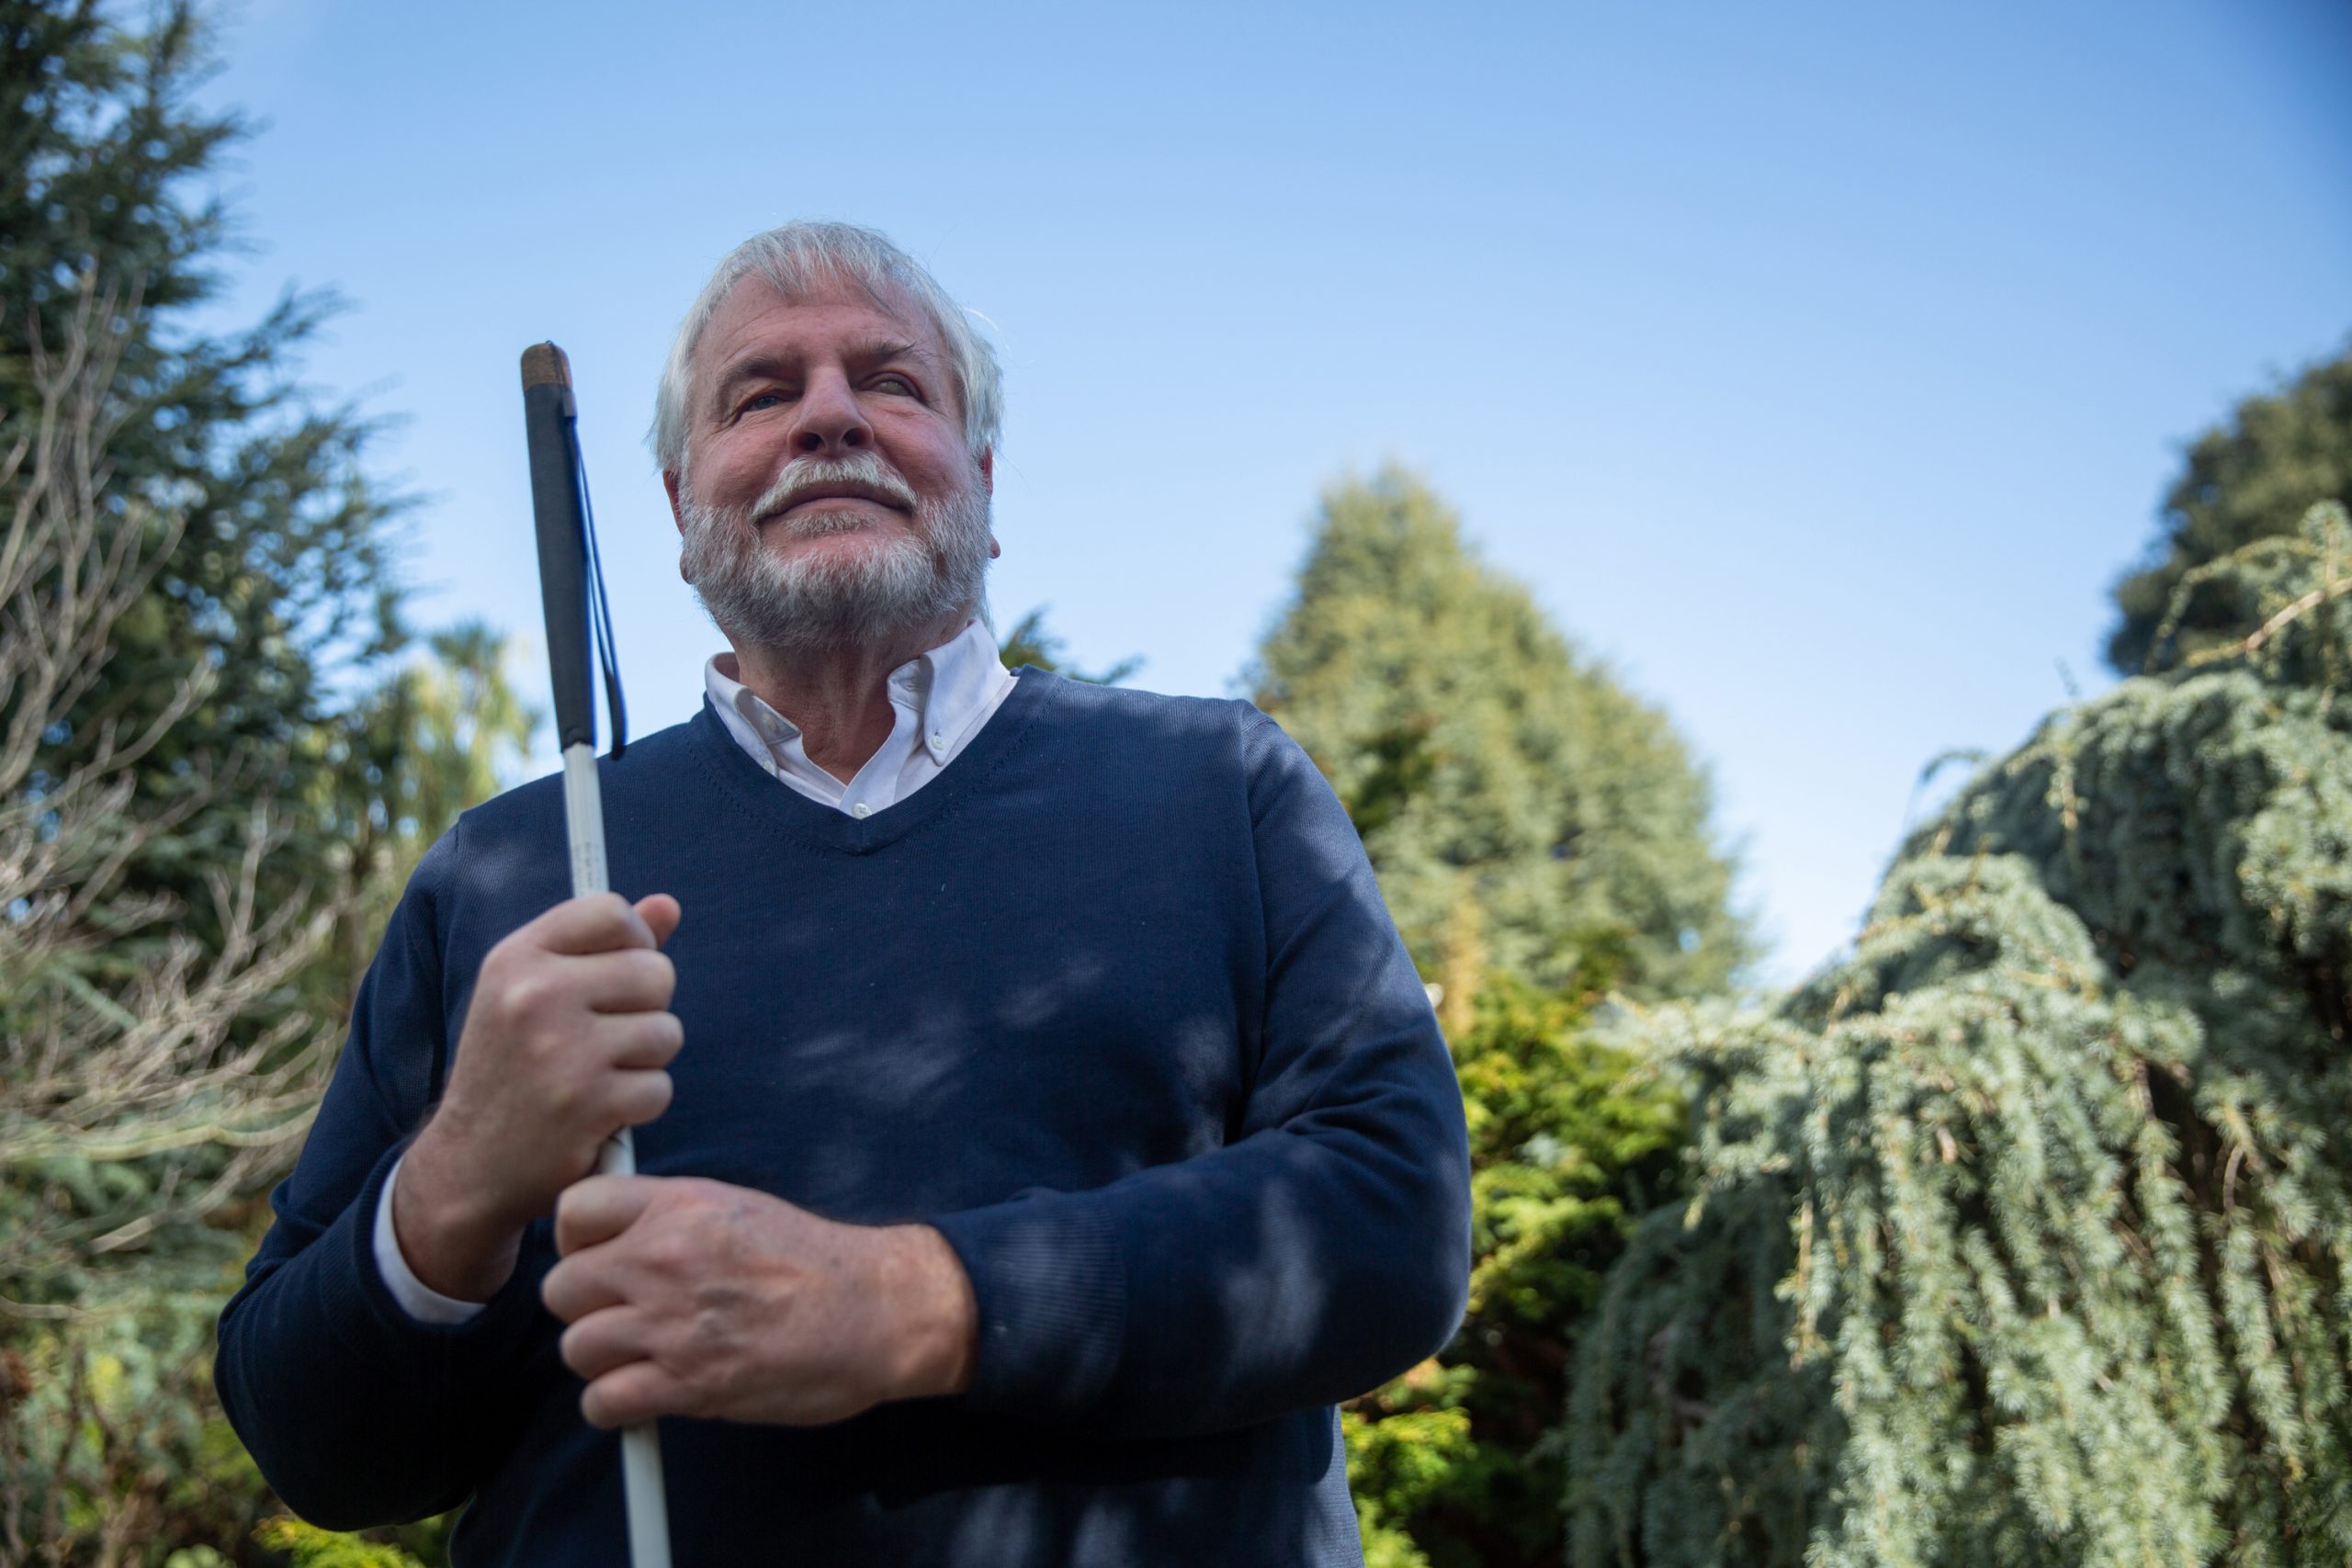 An image of a man who is blind with short grey hair, and green trees in the background.